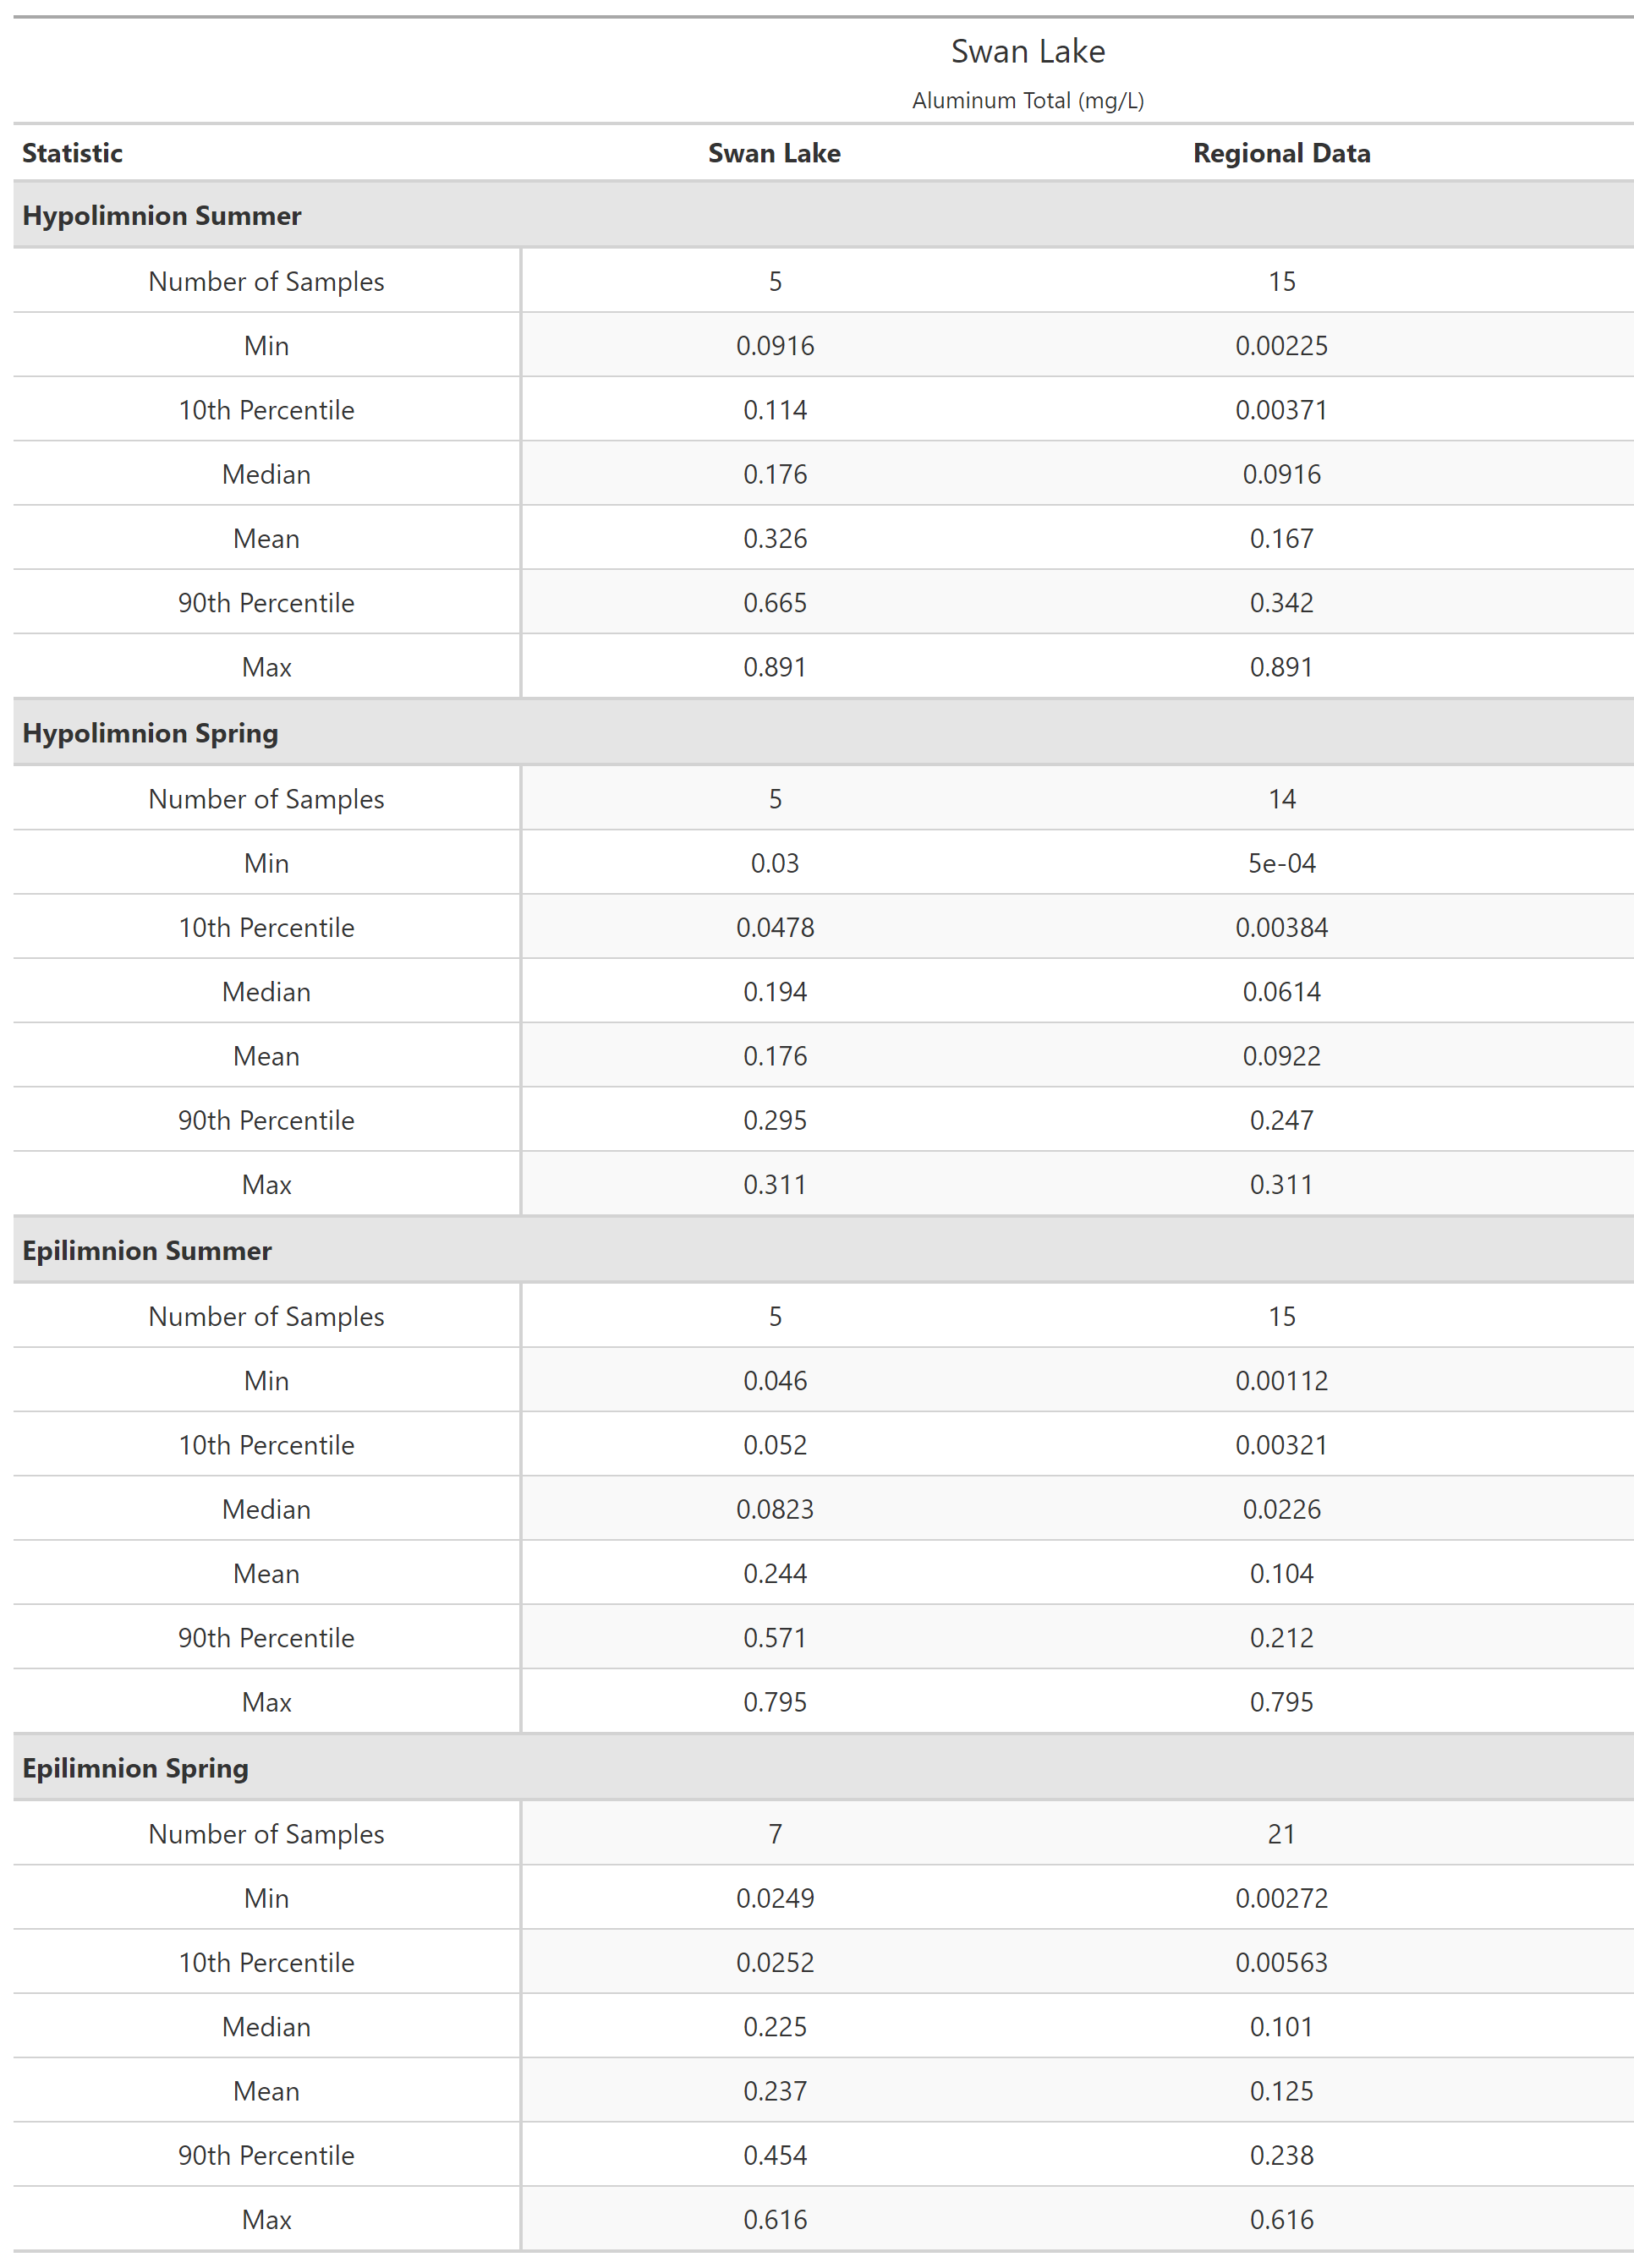 A table of summary statistics for Aluminum Total with comparison to regional data